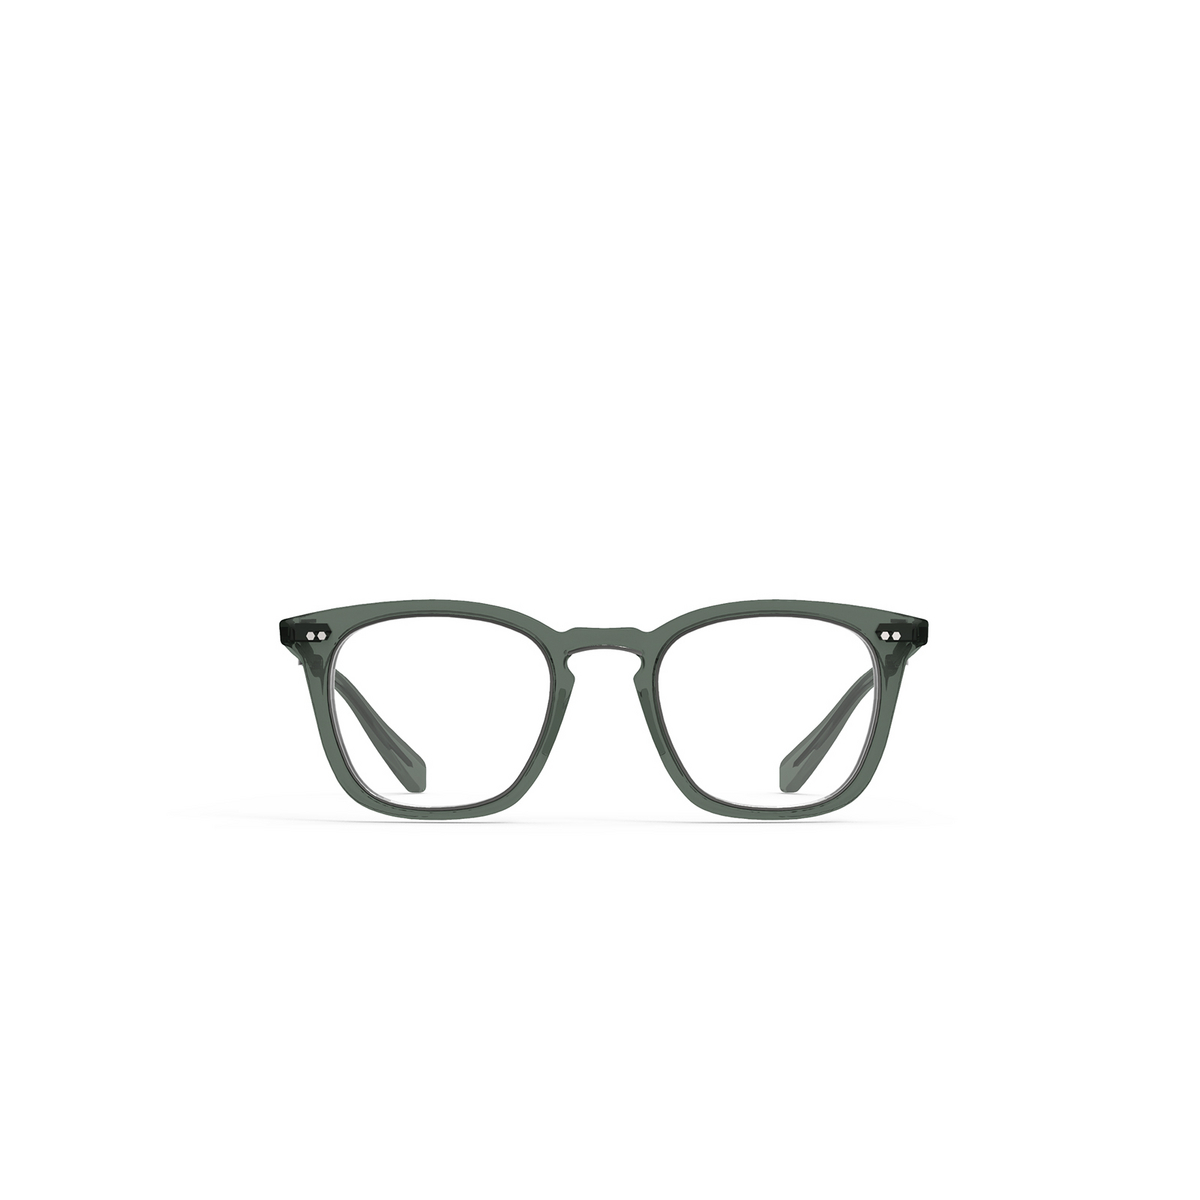 Mr. Leight® Square Eyeglasses: Getty Ii C color Grey Sage-pewter Grys-pw - front view.